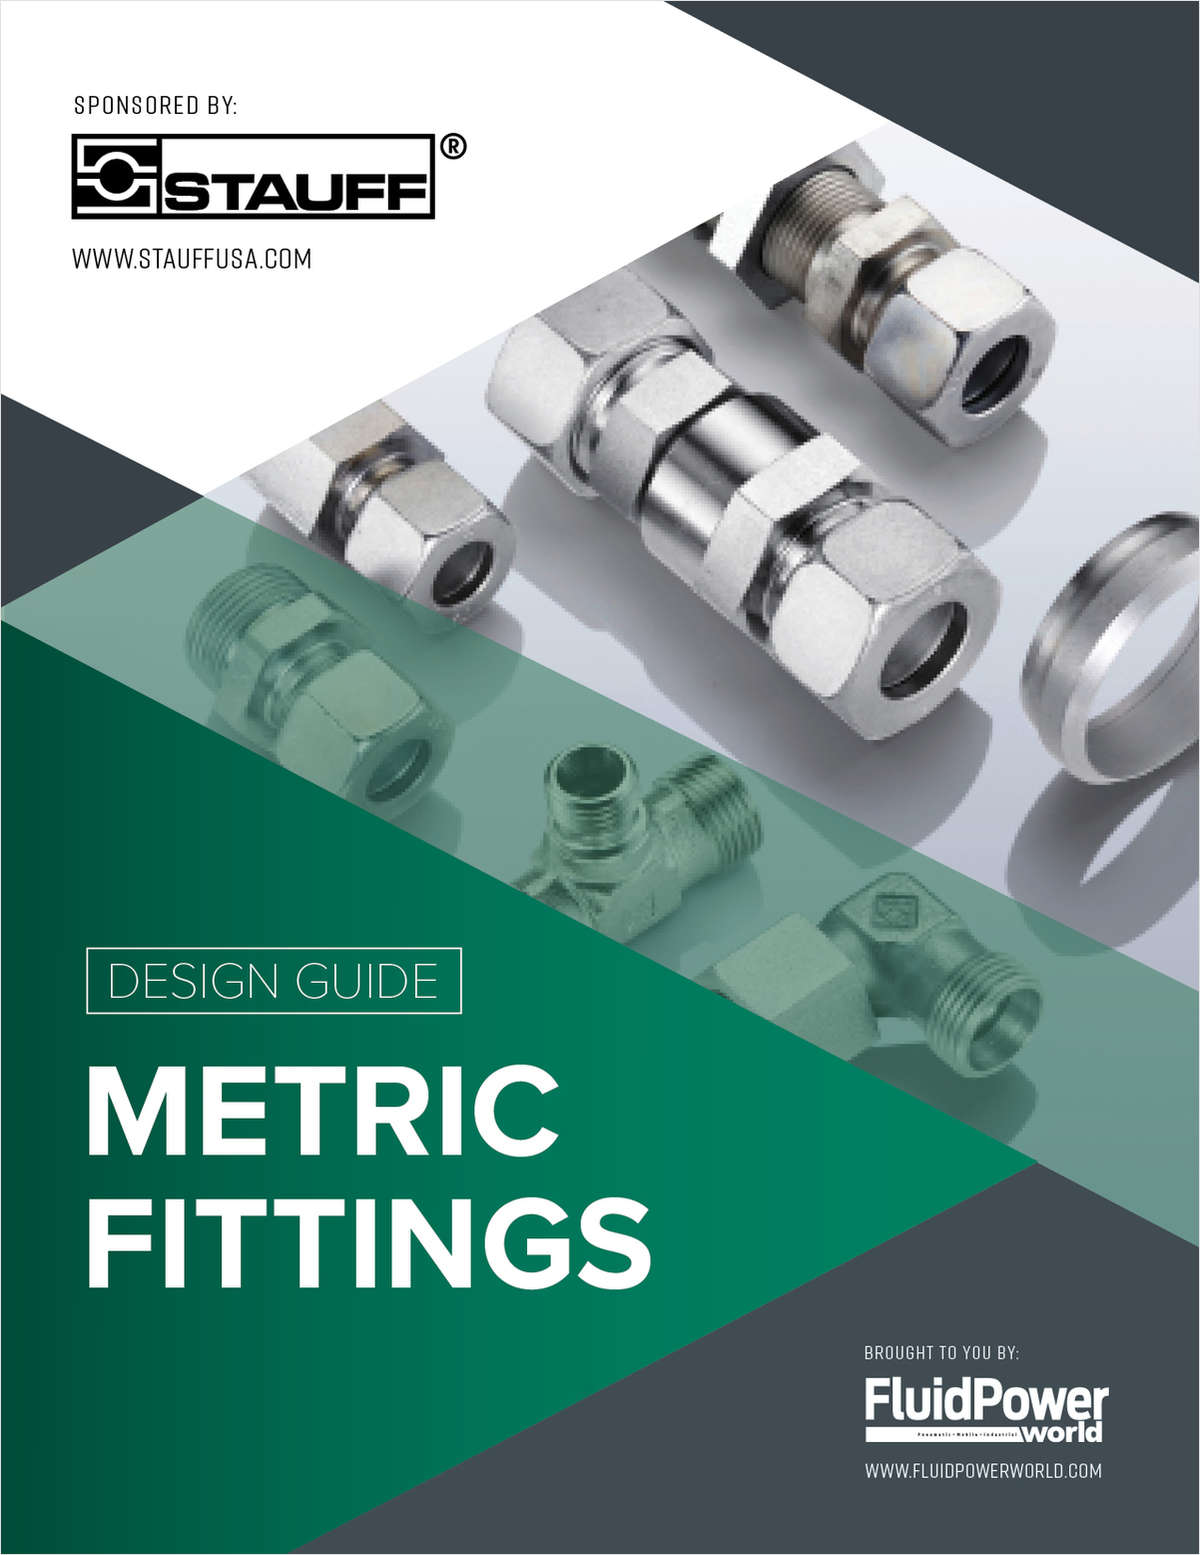 Design Guide on Metric Fittings